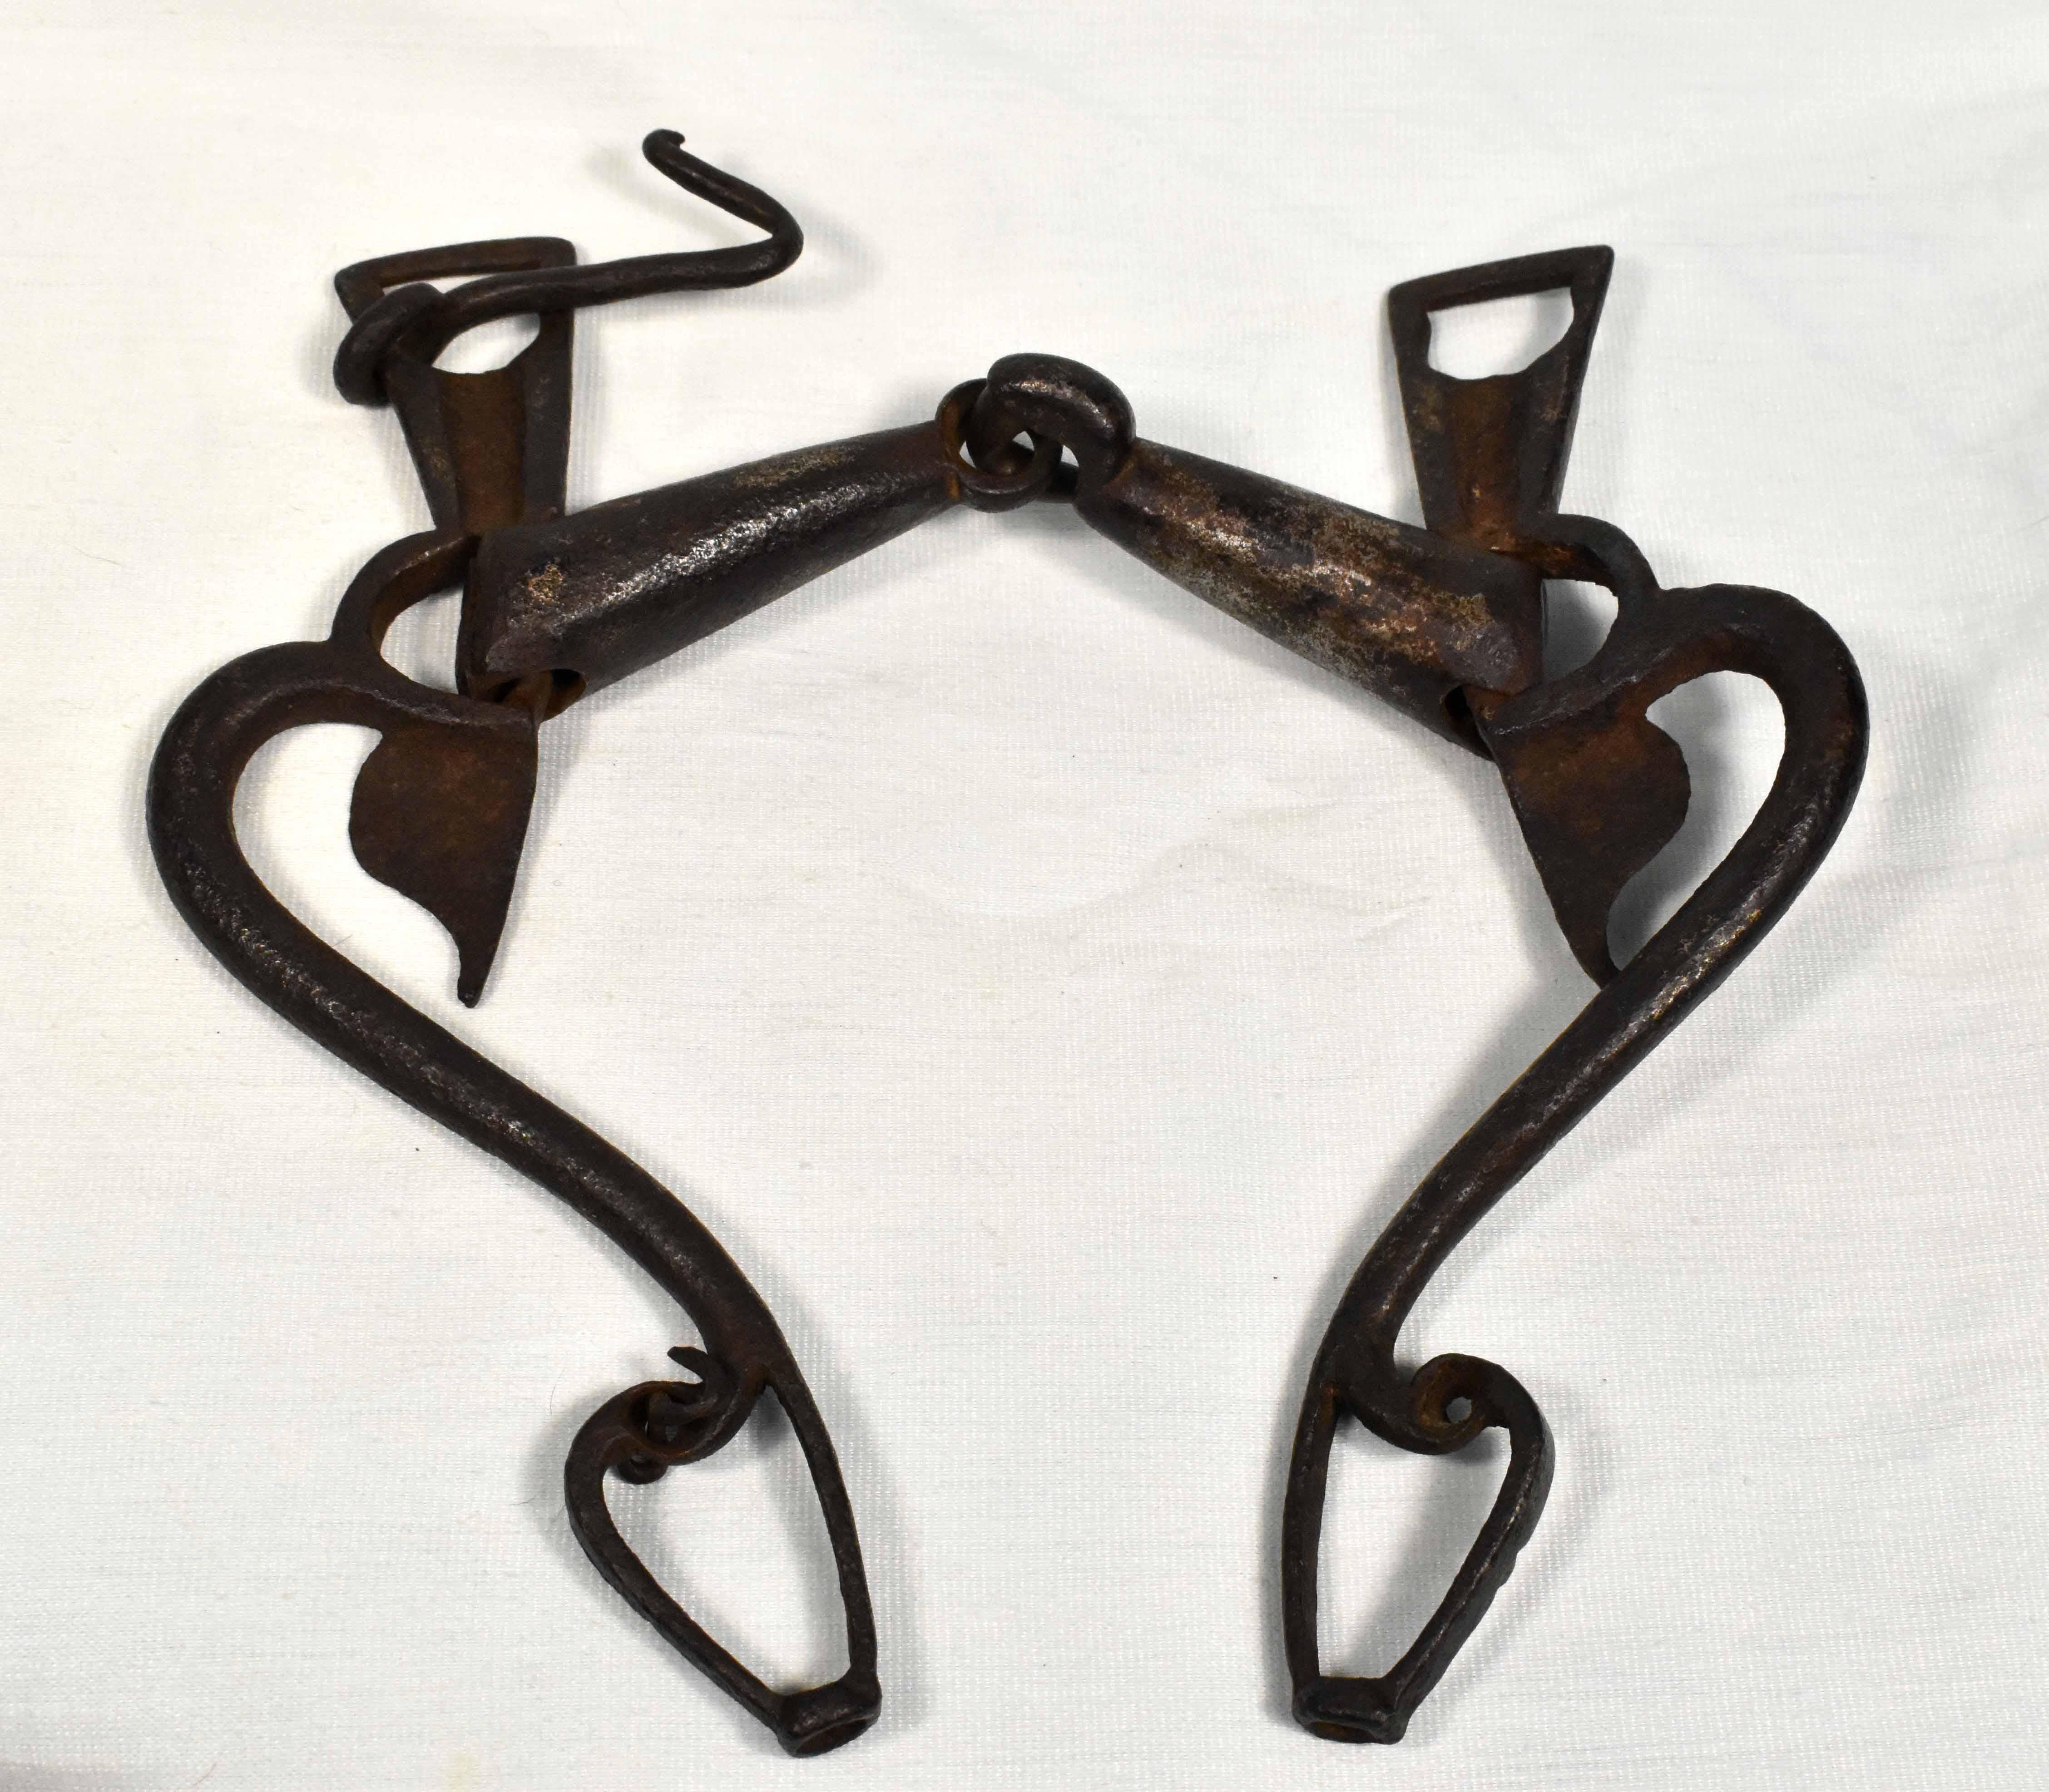 Renaissance Unique Historical Horse Bit from the 16th-17th Century For Sale